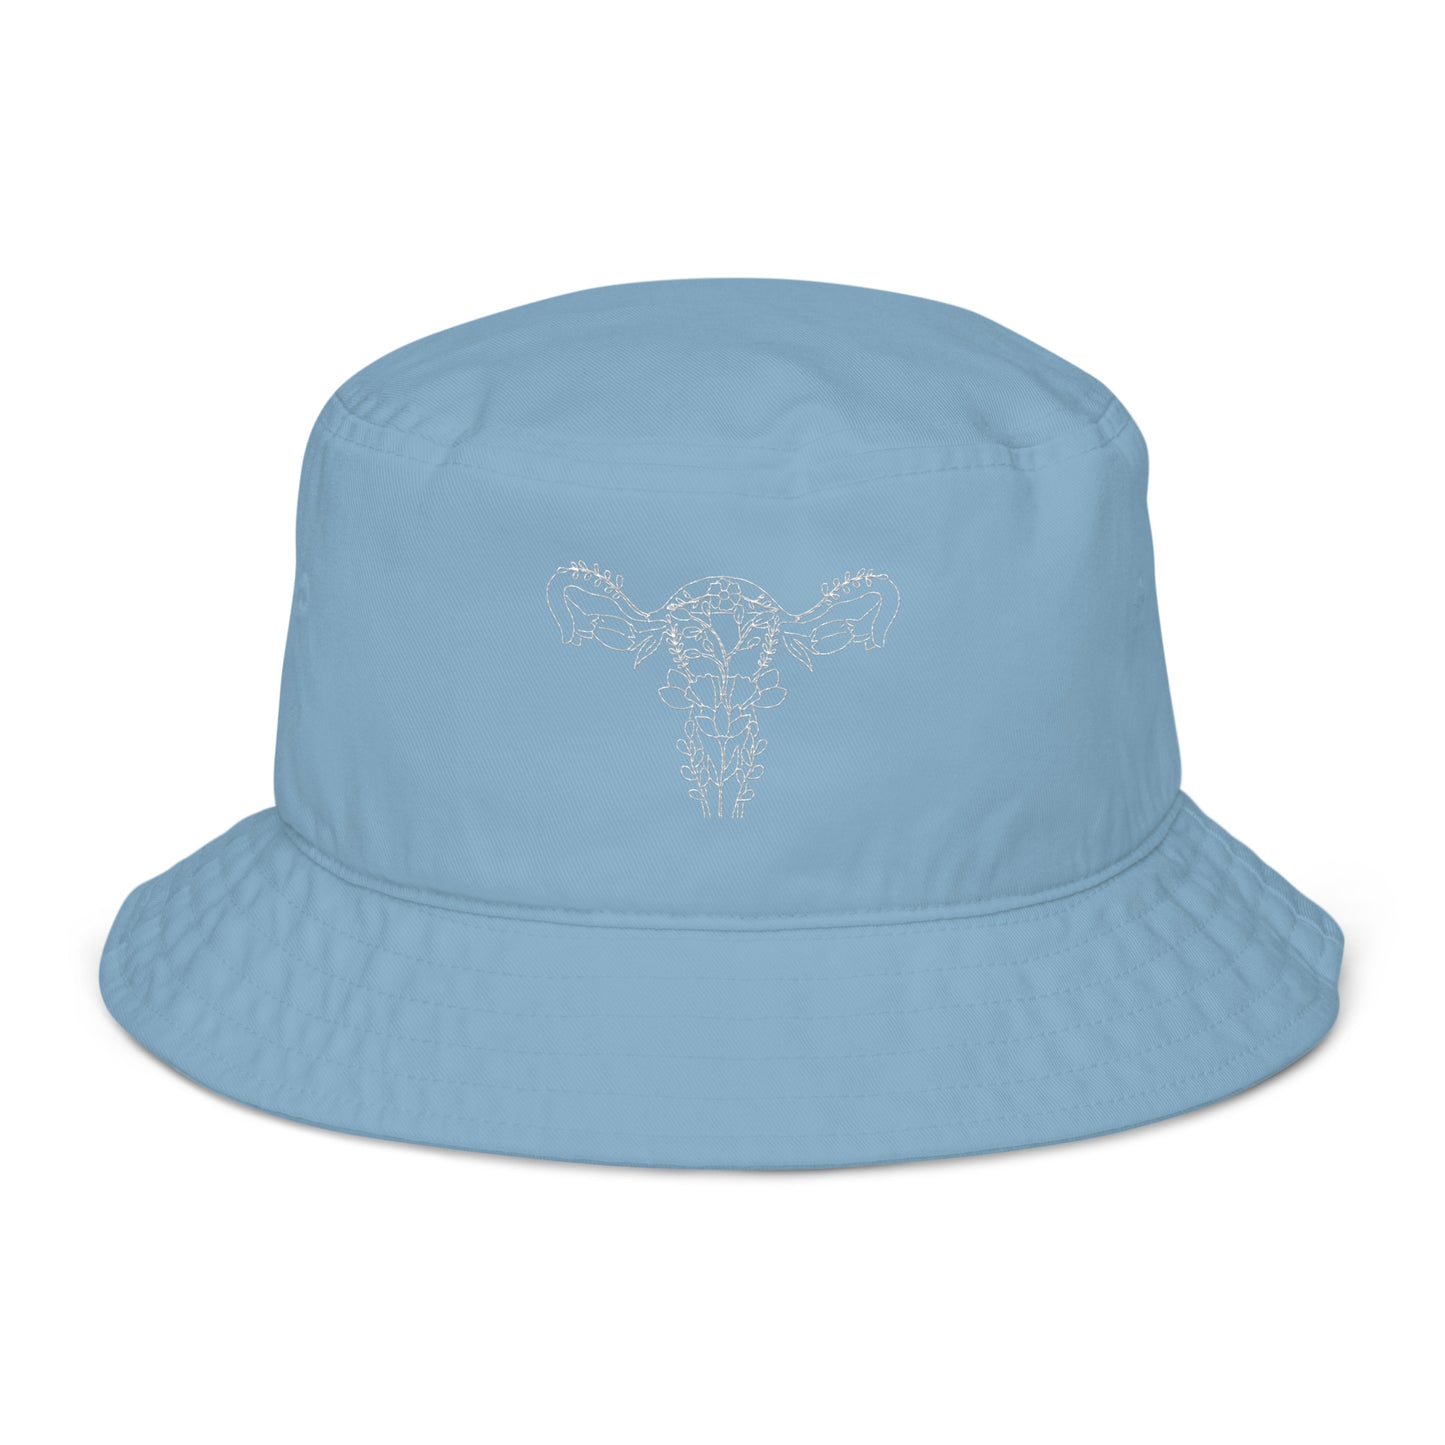 Reproductive Rights Bucket Hat